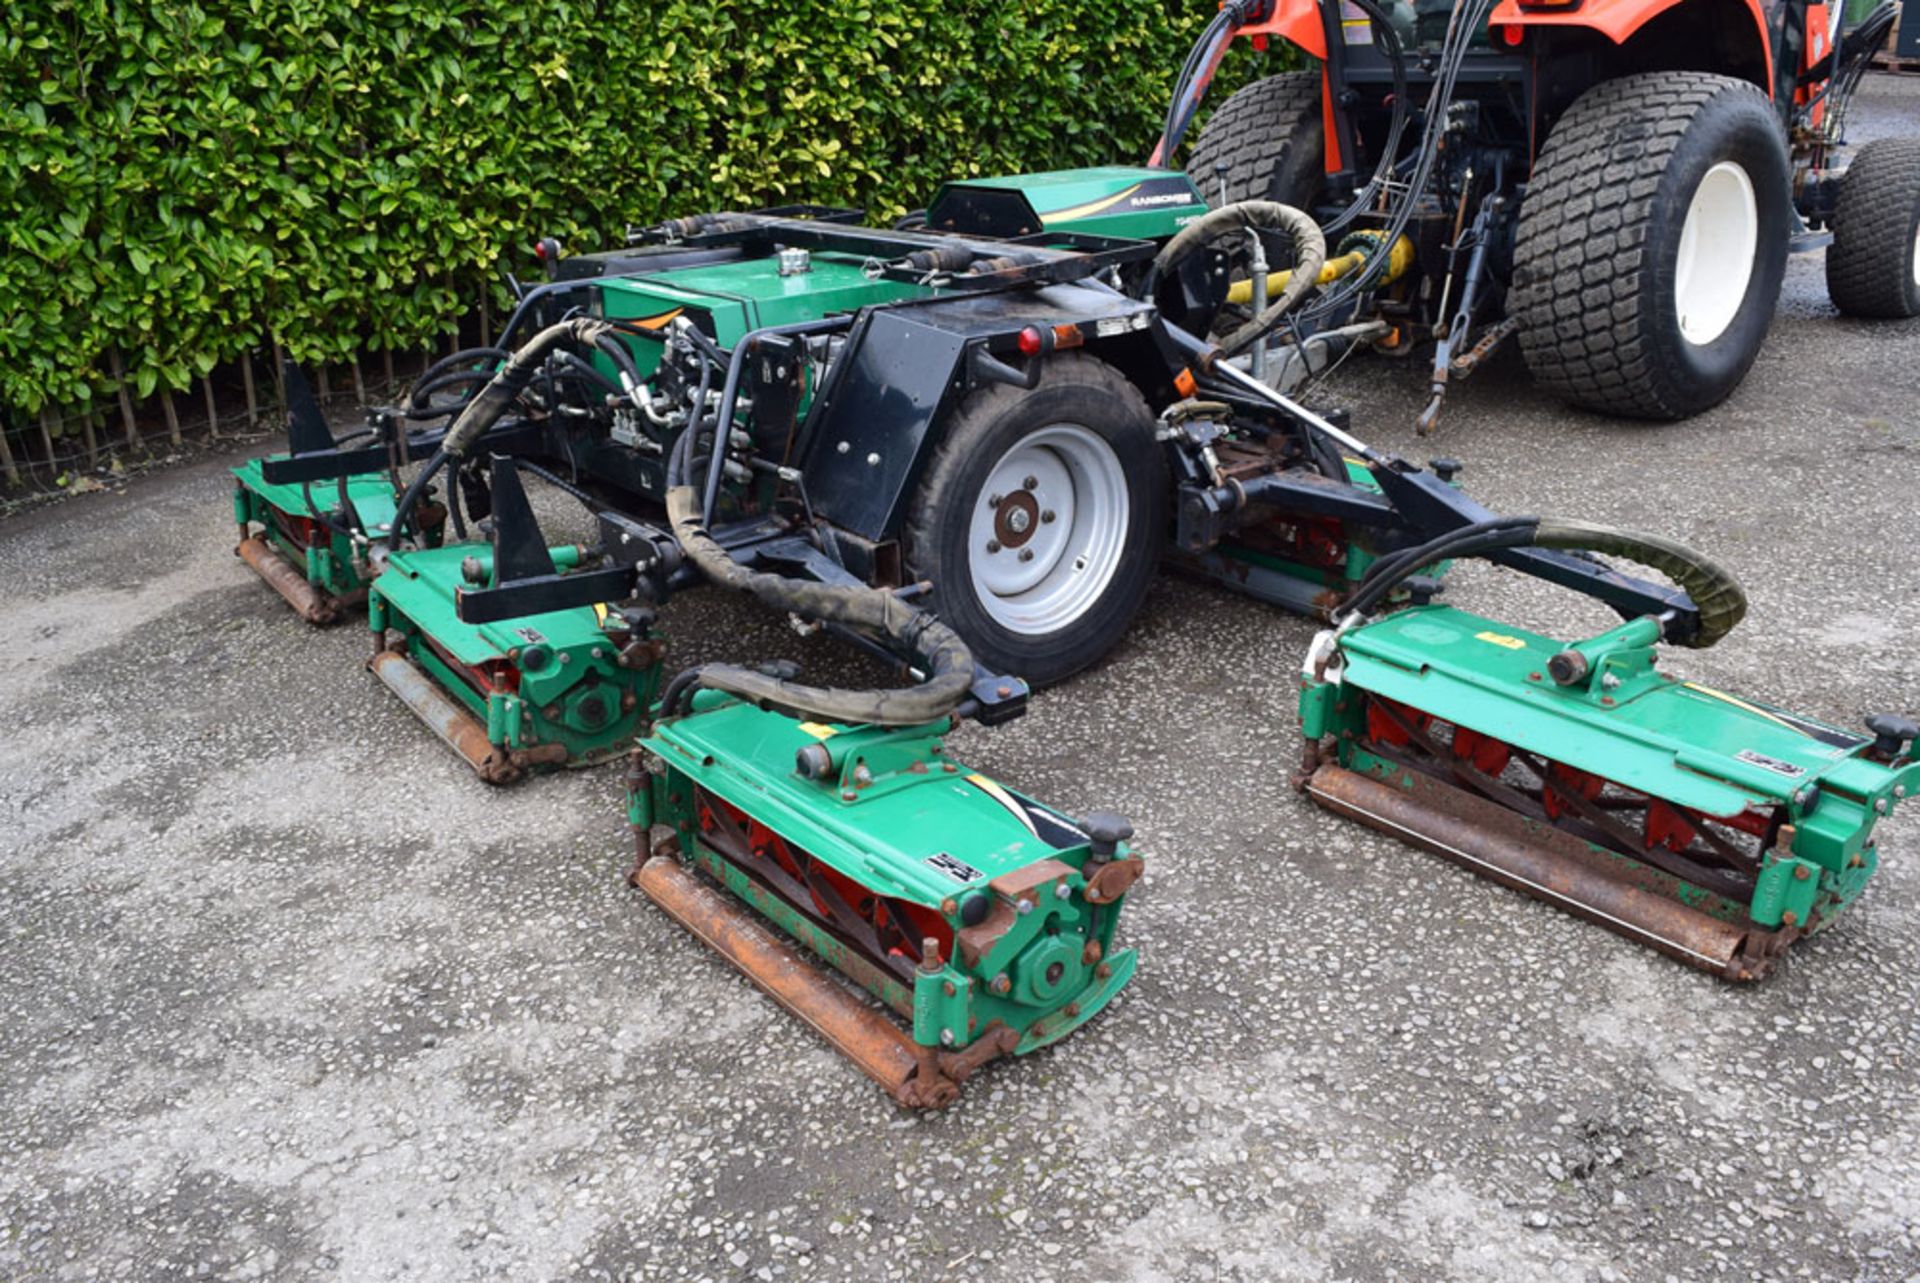 2009 Ransomes TG4650 Tractor Mount Trailed Cylinder Gang Mower - Image 8 of 13